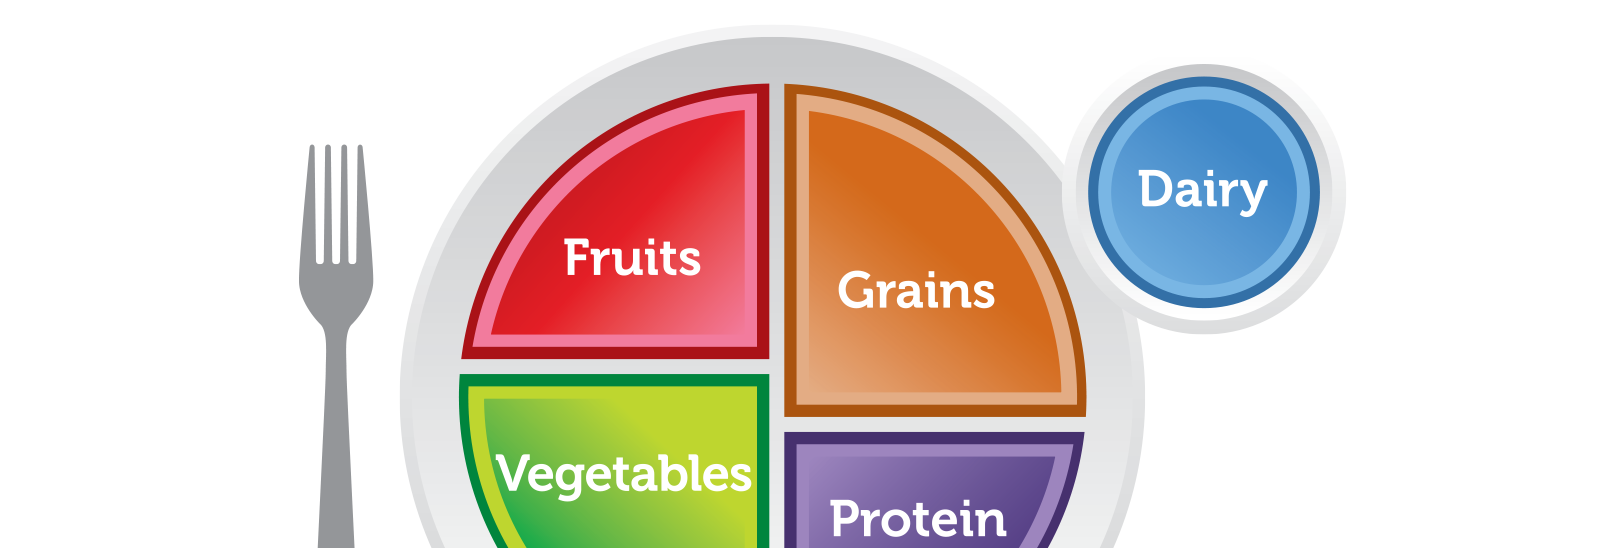 Image of MyPlate